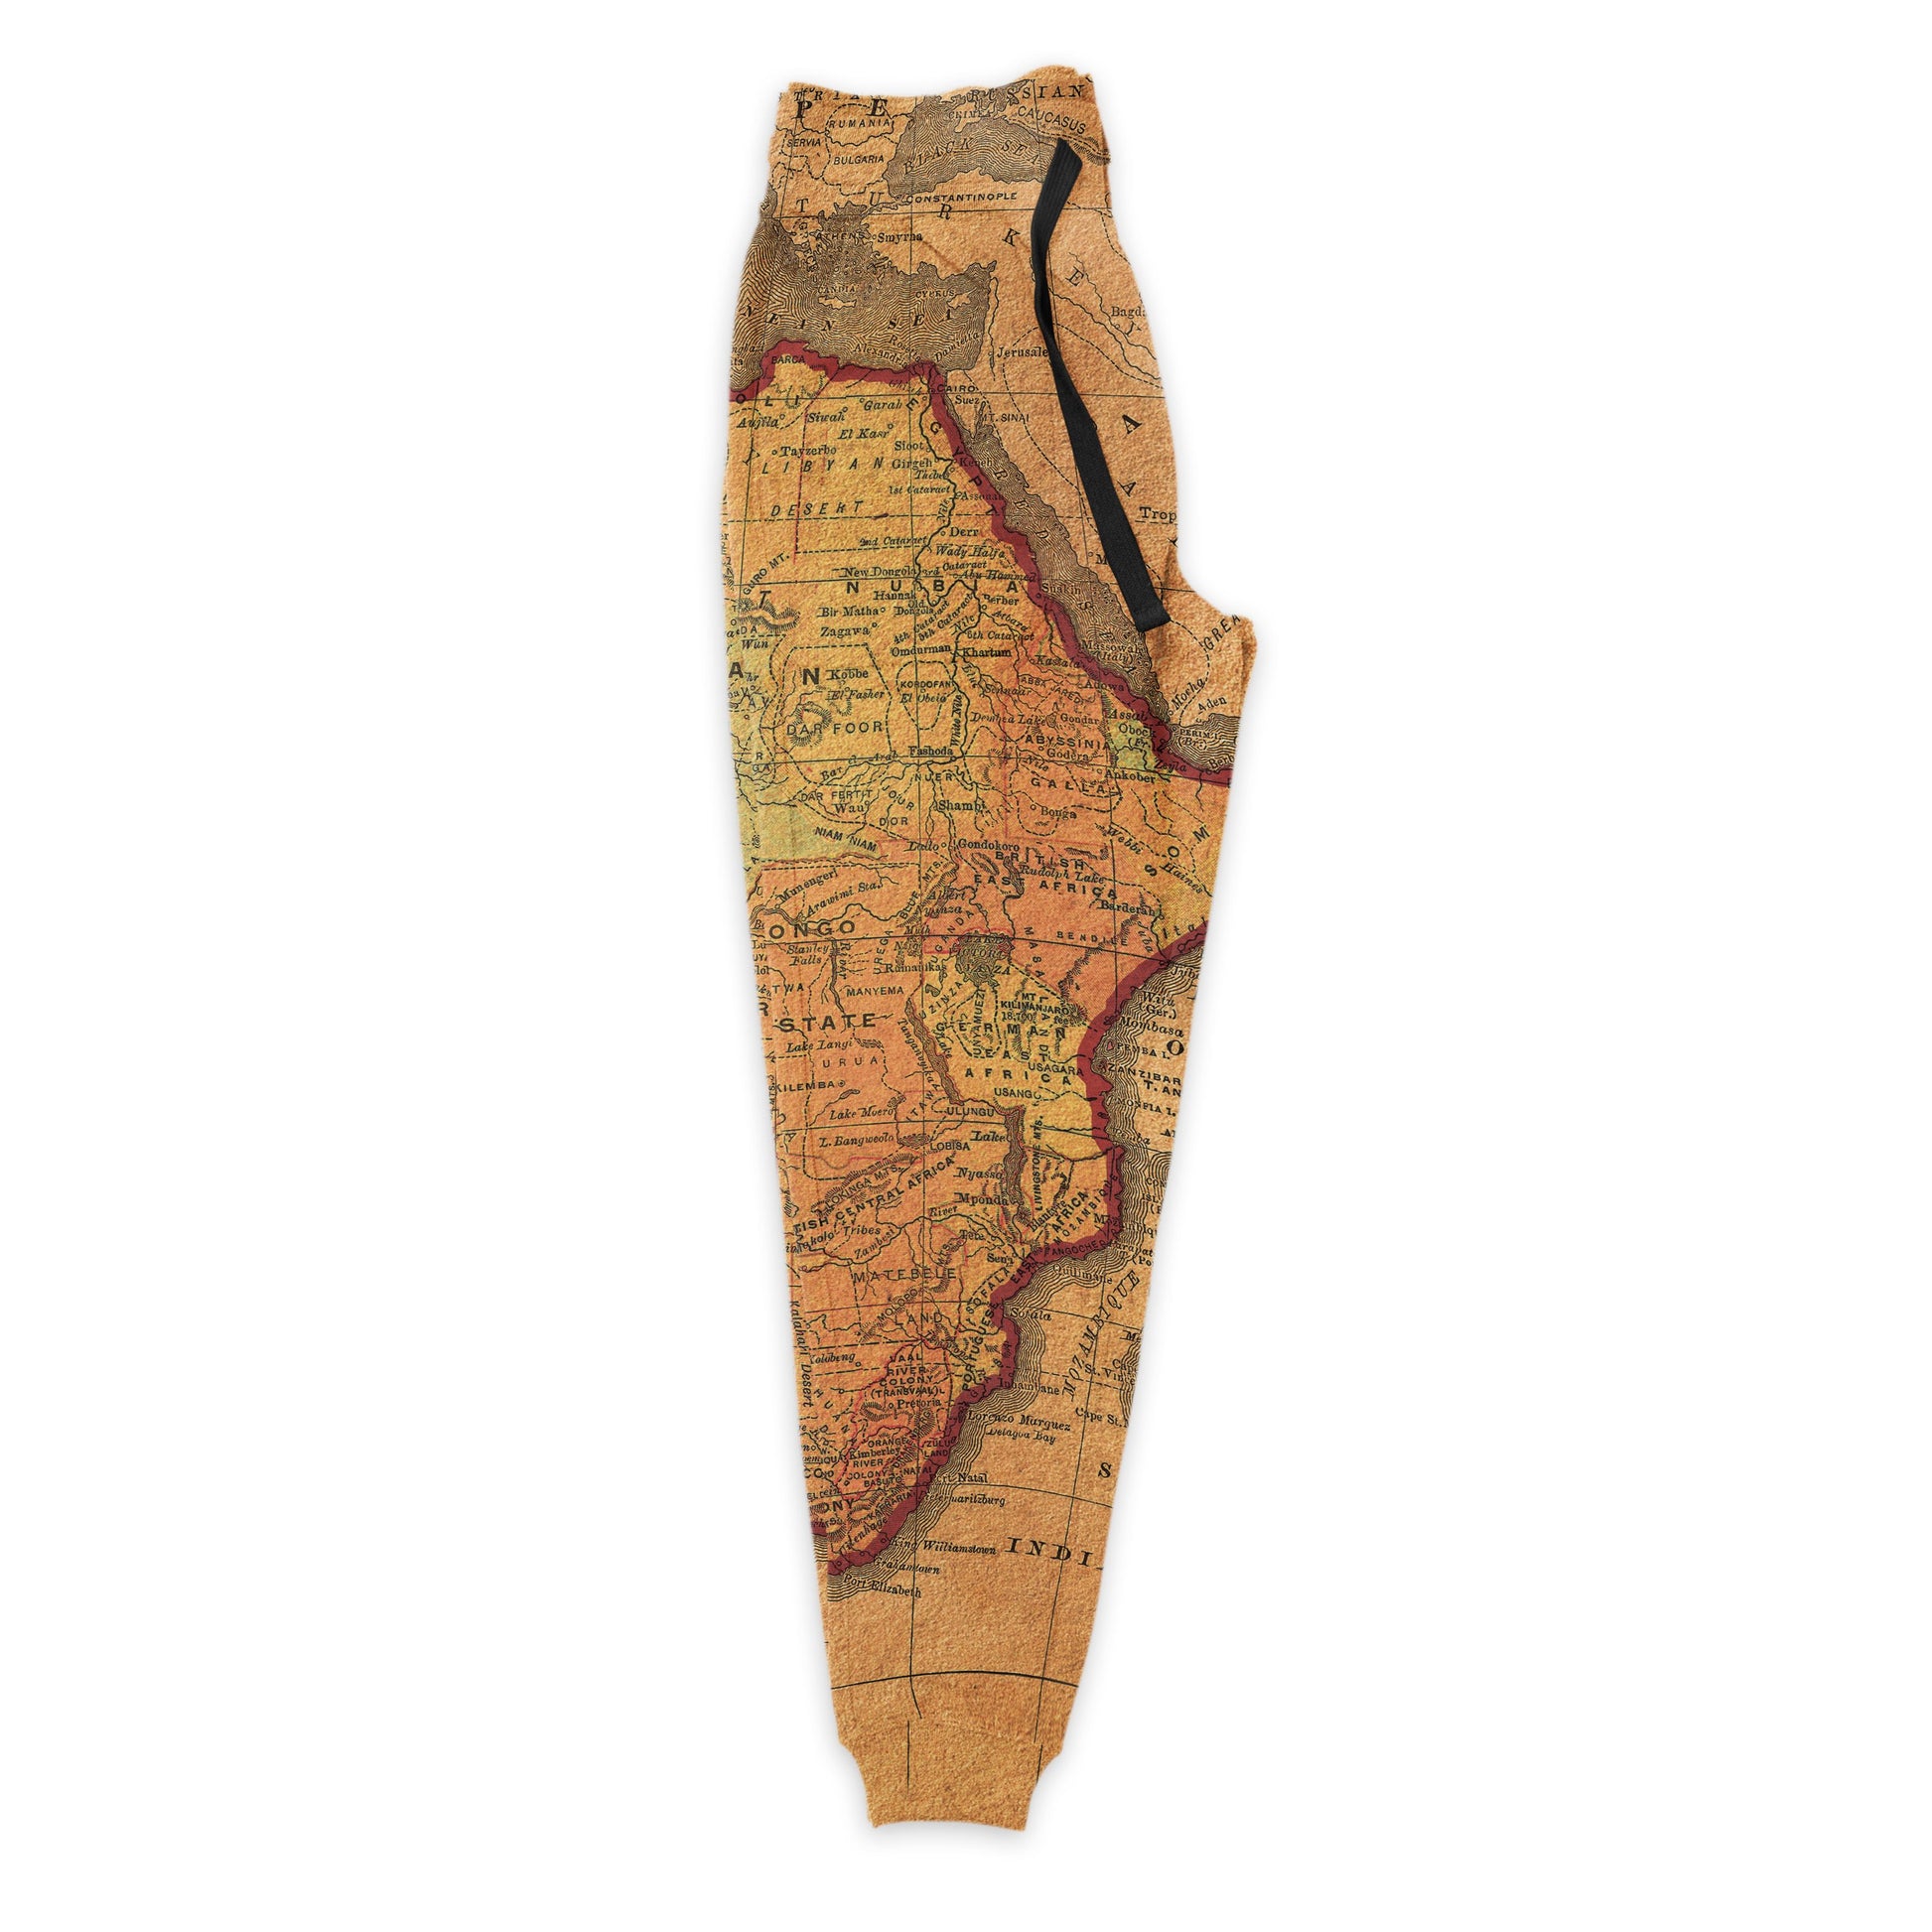 Vintage Africa Map Joggers Joggers Tianci 